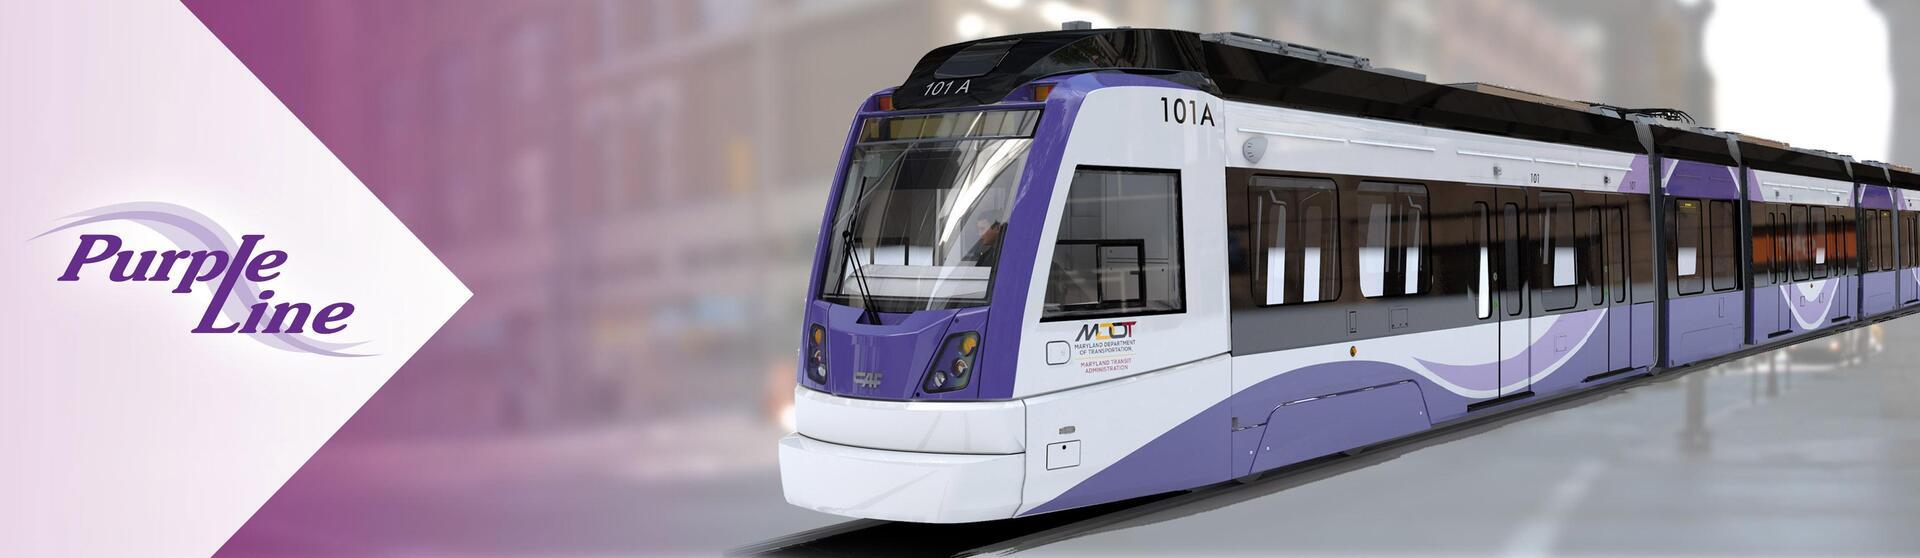 Community Meetings Being Held In-Person to Address Progress of Purple Line Construction